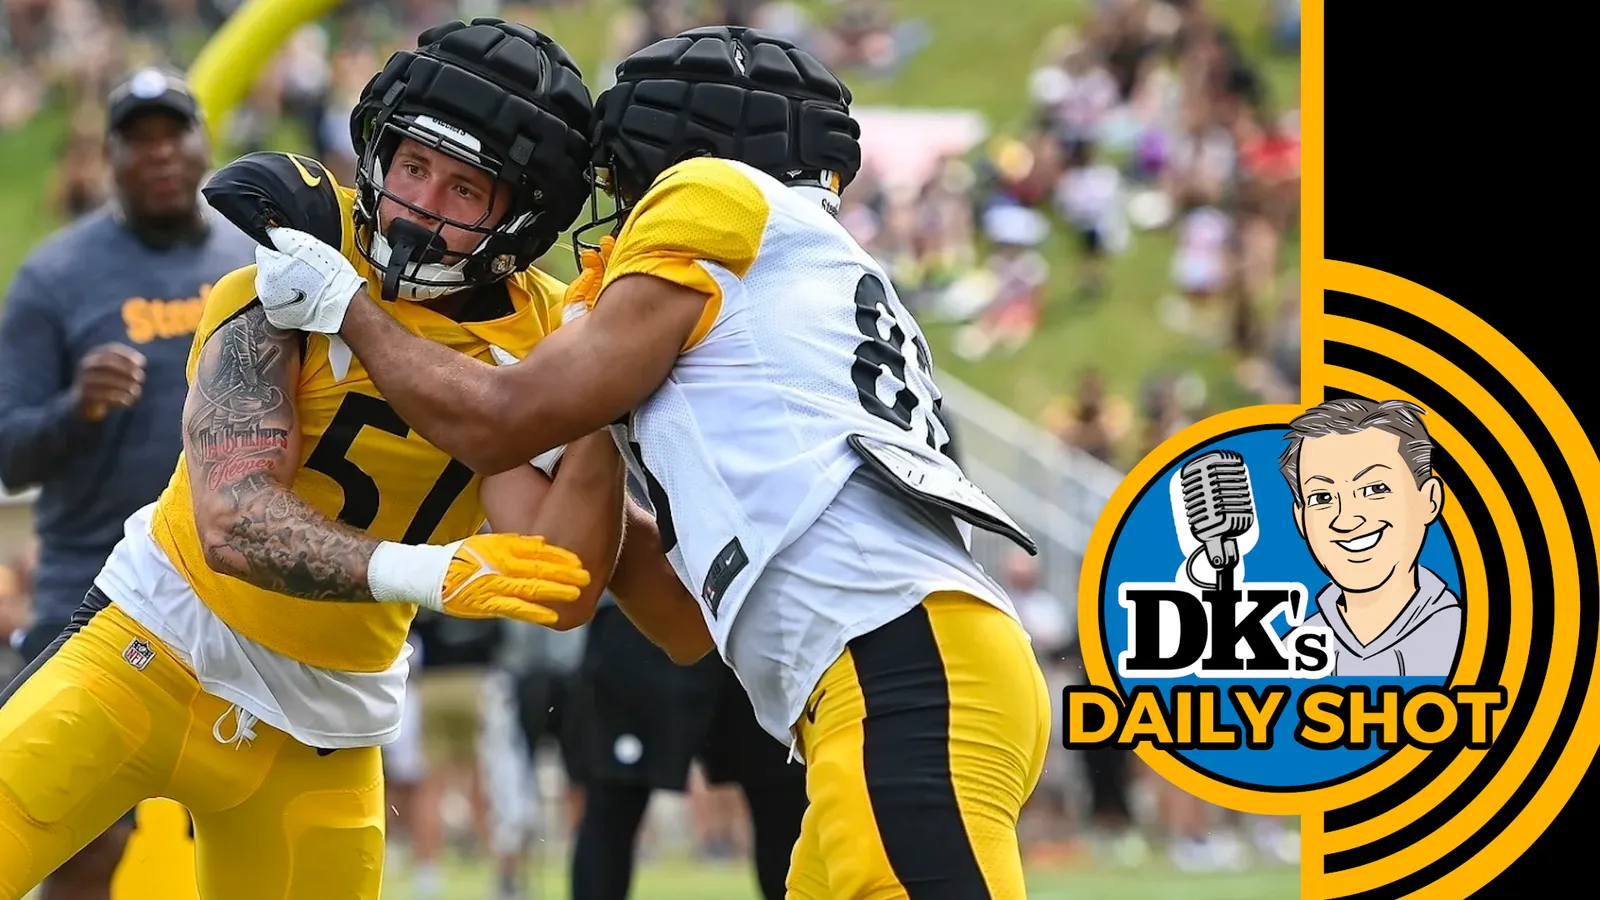 DK's Daily Shot of Steelers: Get physical